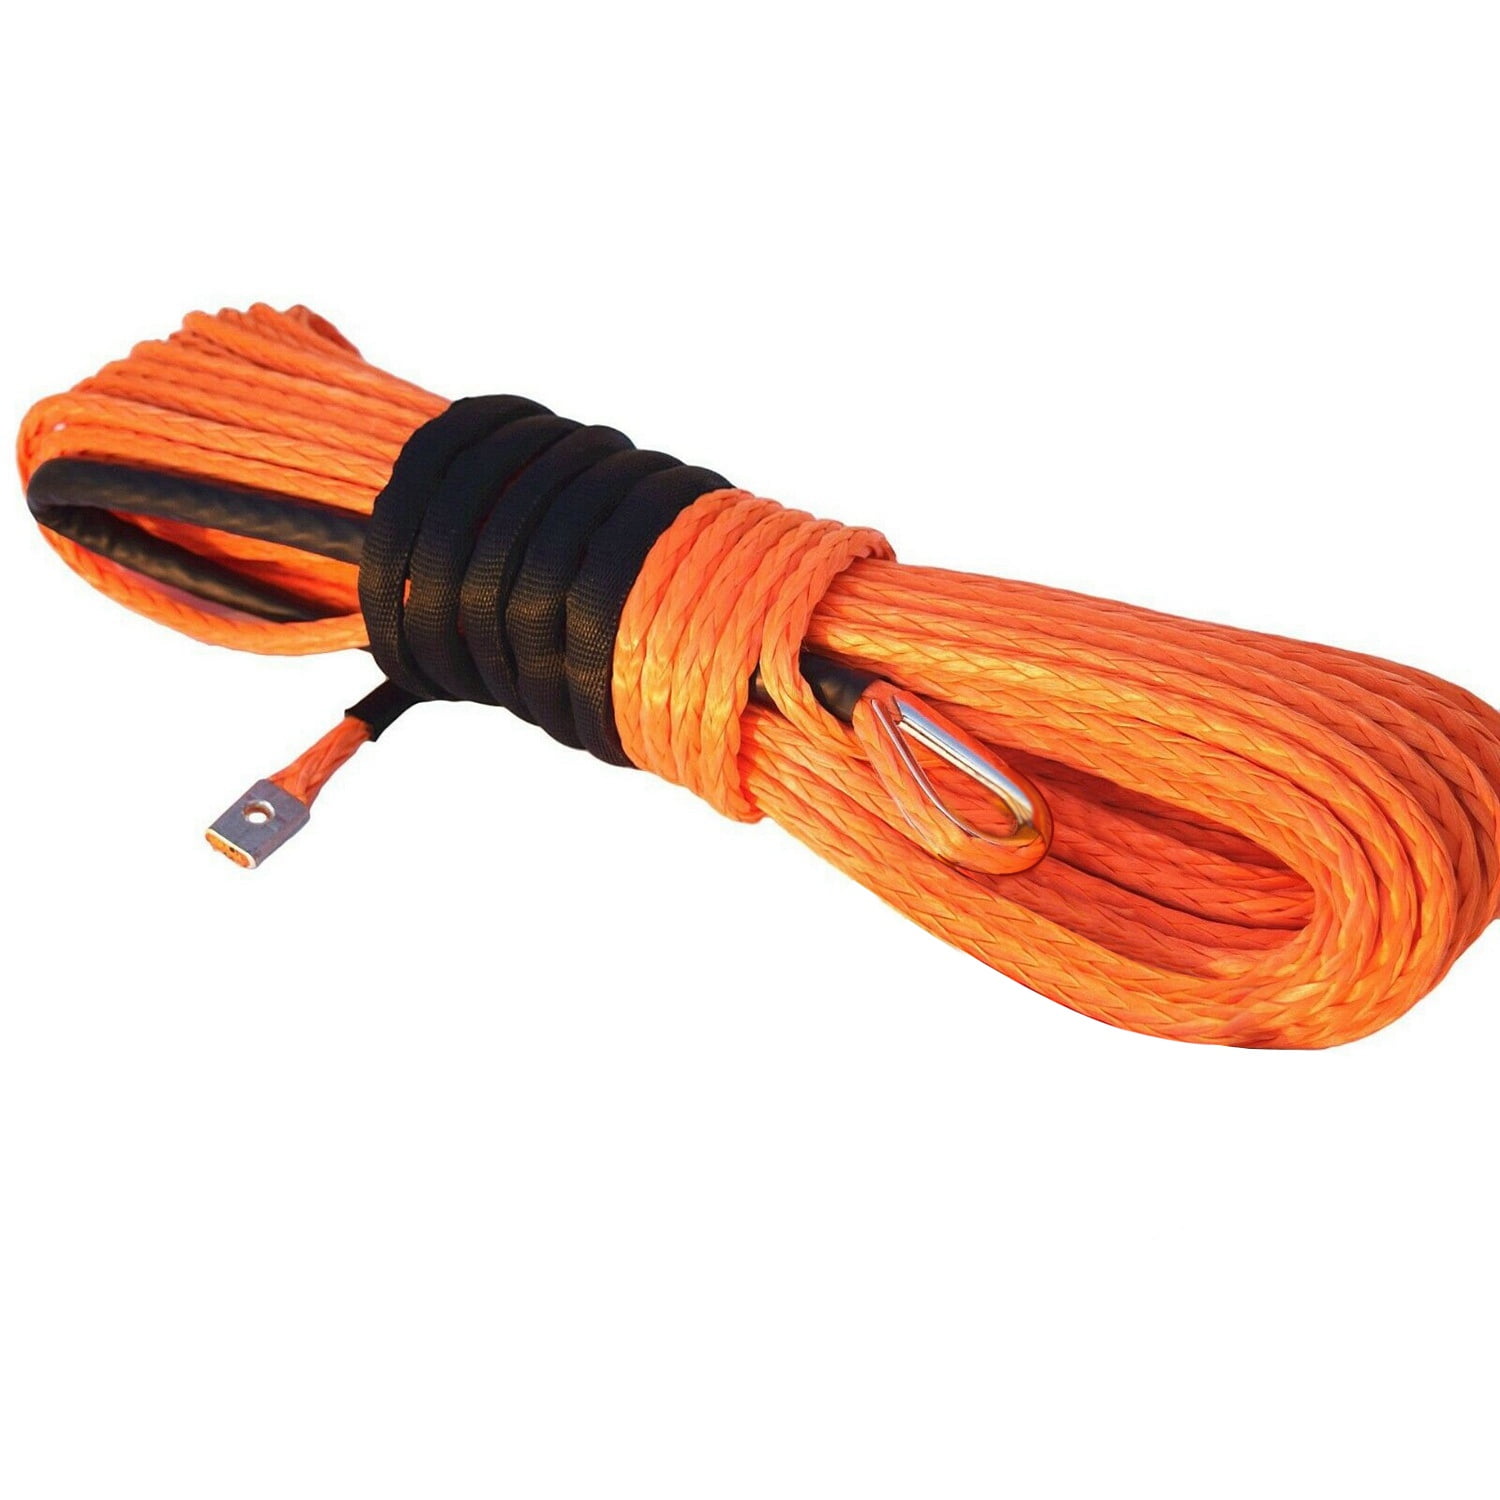 Synthetic Winch Rope ELUTO 49’x1/4 7000+LBs Winch Rope Line Cable with Sheath Winches for Winches SUV ATV UTV Vehicle Boat Ramsey Car Orange 